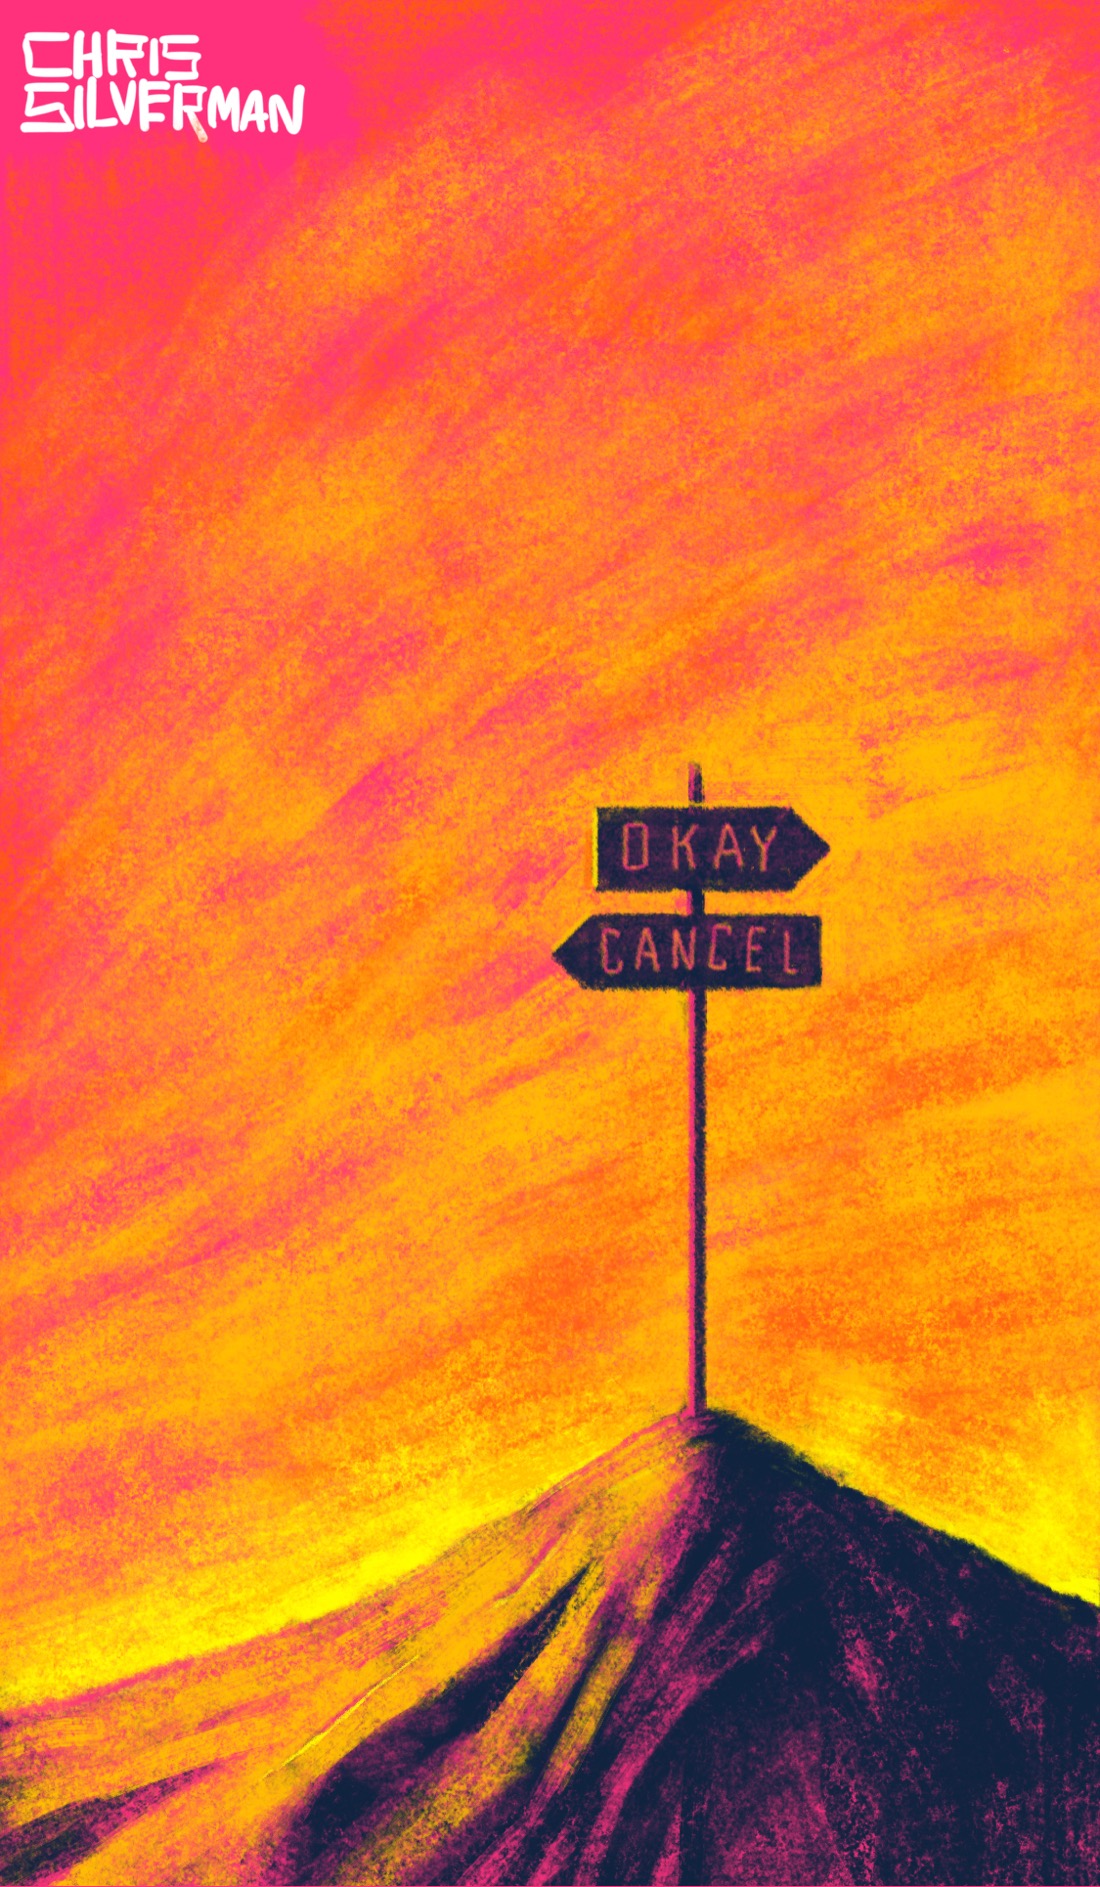 A mountain in the middle of nowhere, under a blazing yellow and crimson sky. Planted at the very peak of the mountain is a signpost with two signs: one pointing forward, reading "OK", and one pointing backwards, reading "Cancel".